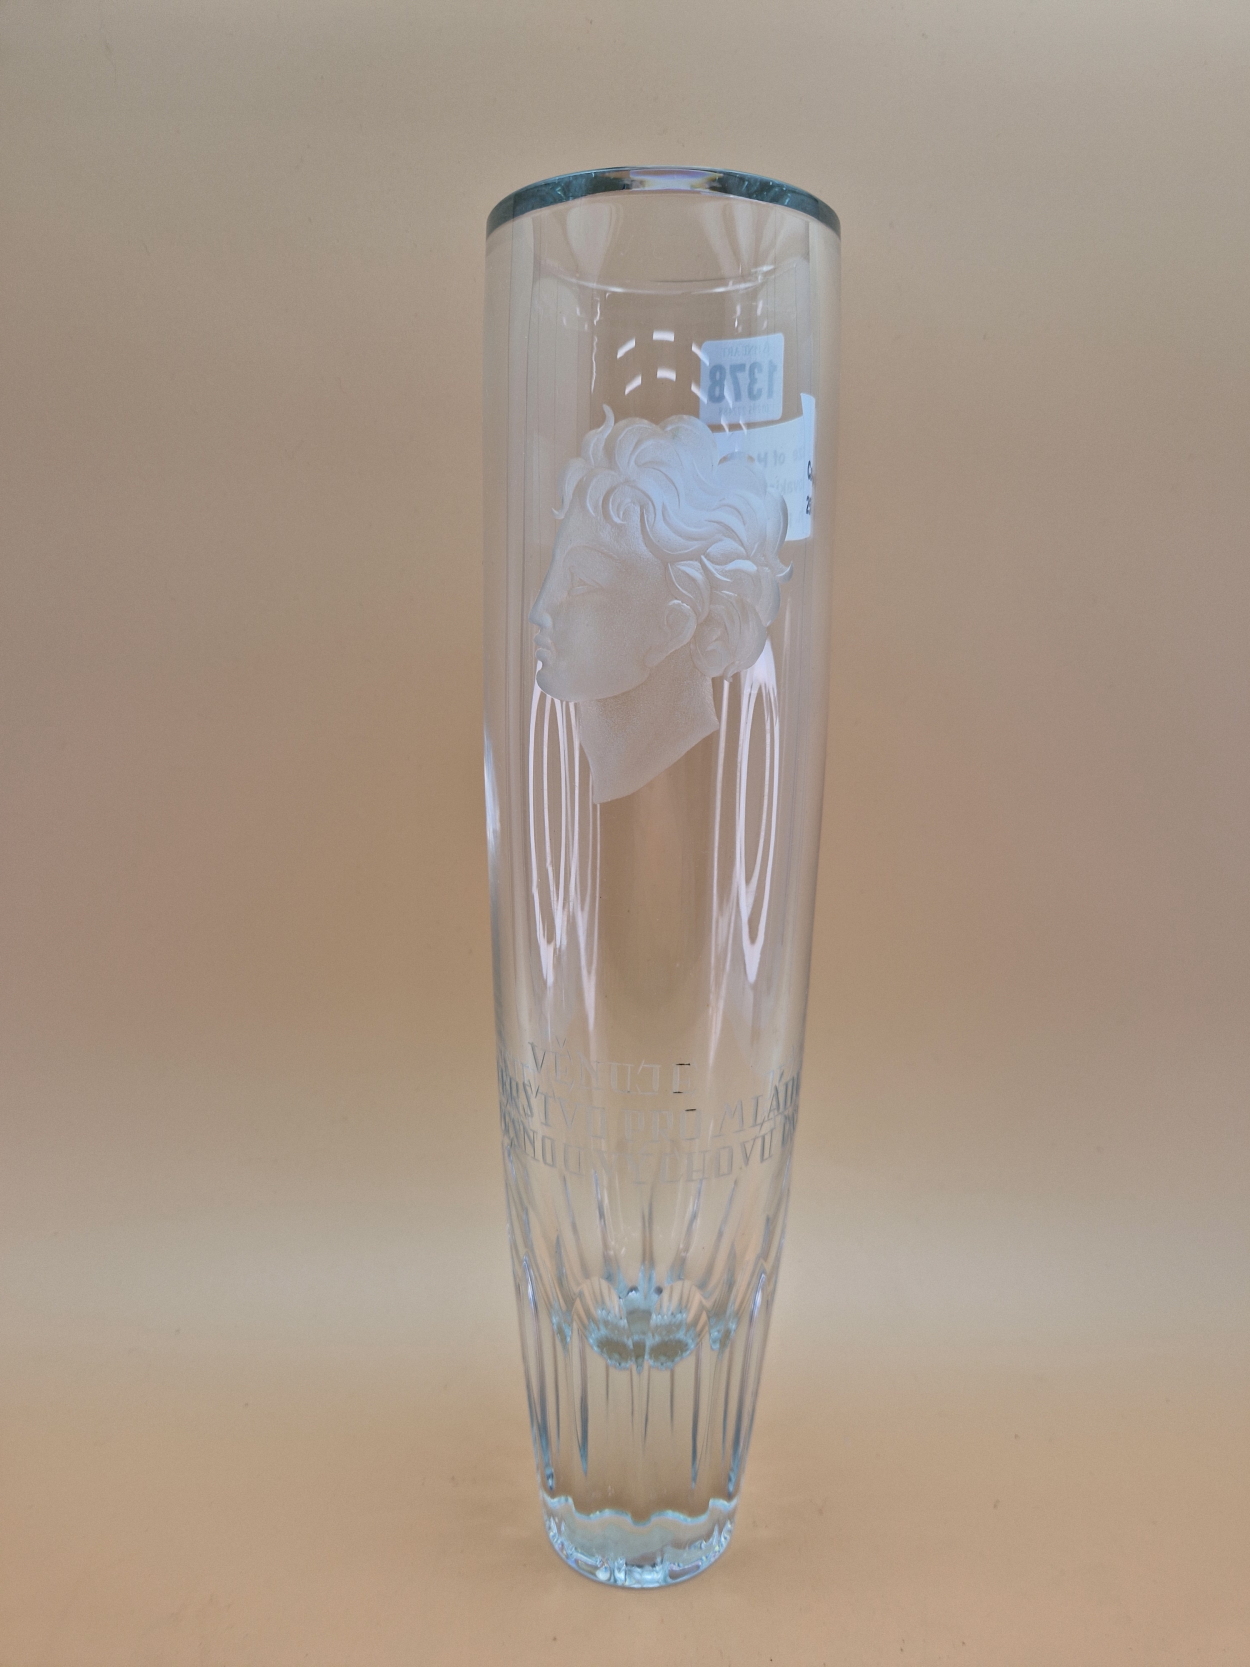 ROD GOULD. A LARGE TALL GLASS TROPHY VASE PRESENTED TO ROD AS 4TH PLACE PRIZE OF HONOUR 1968